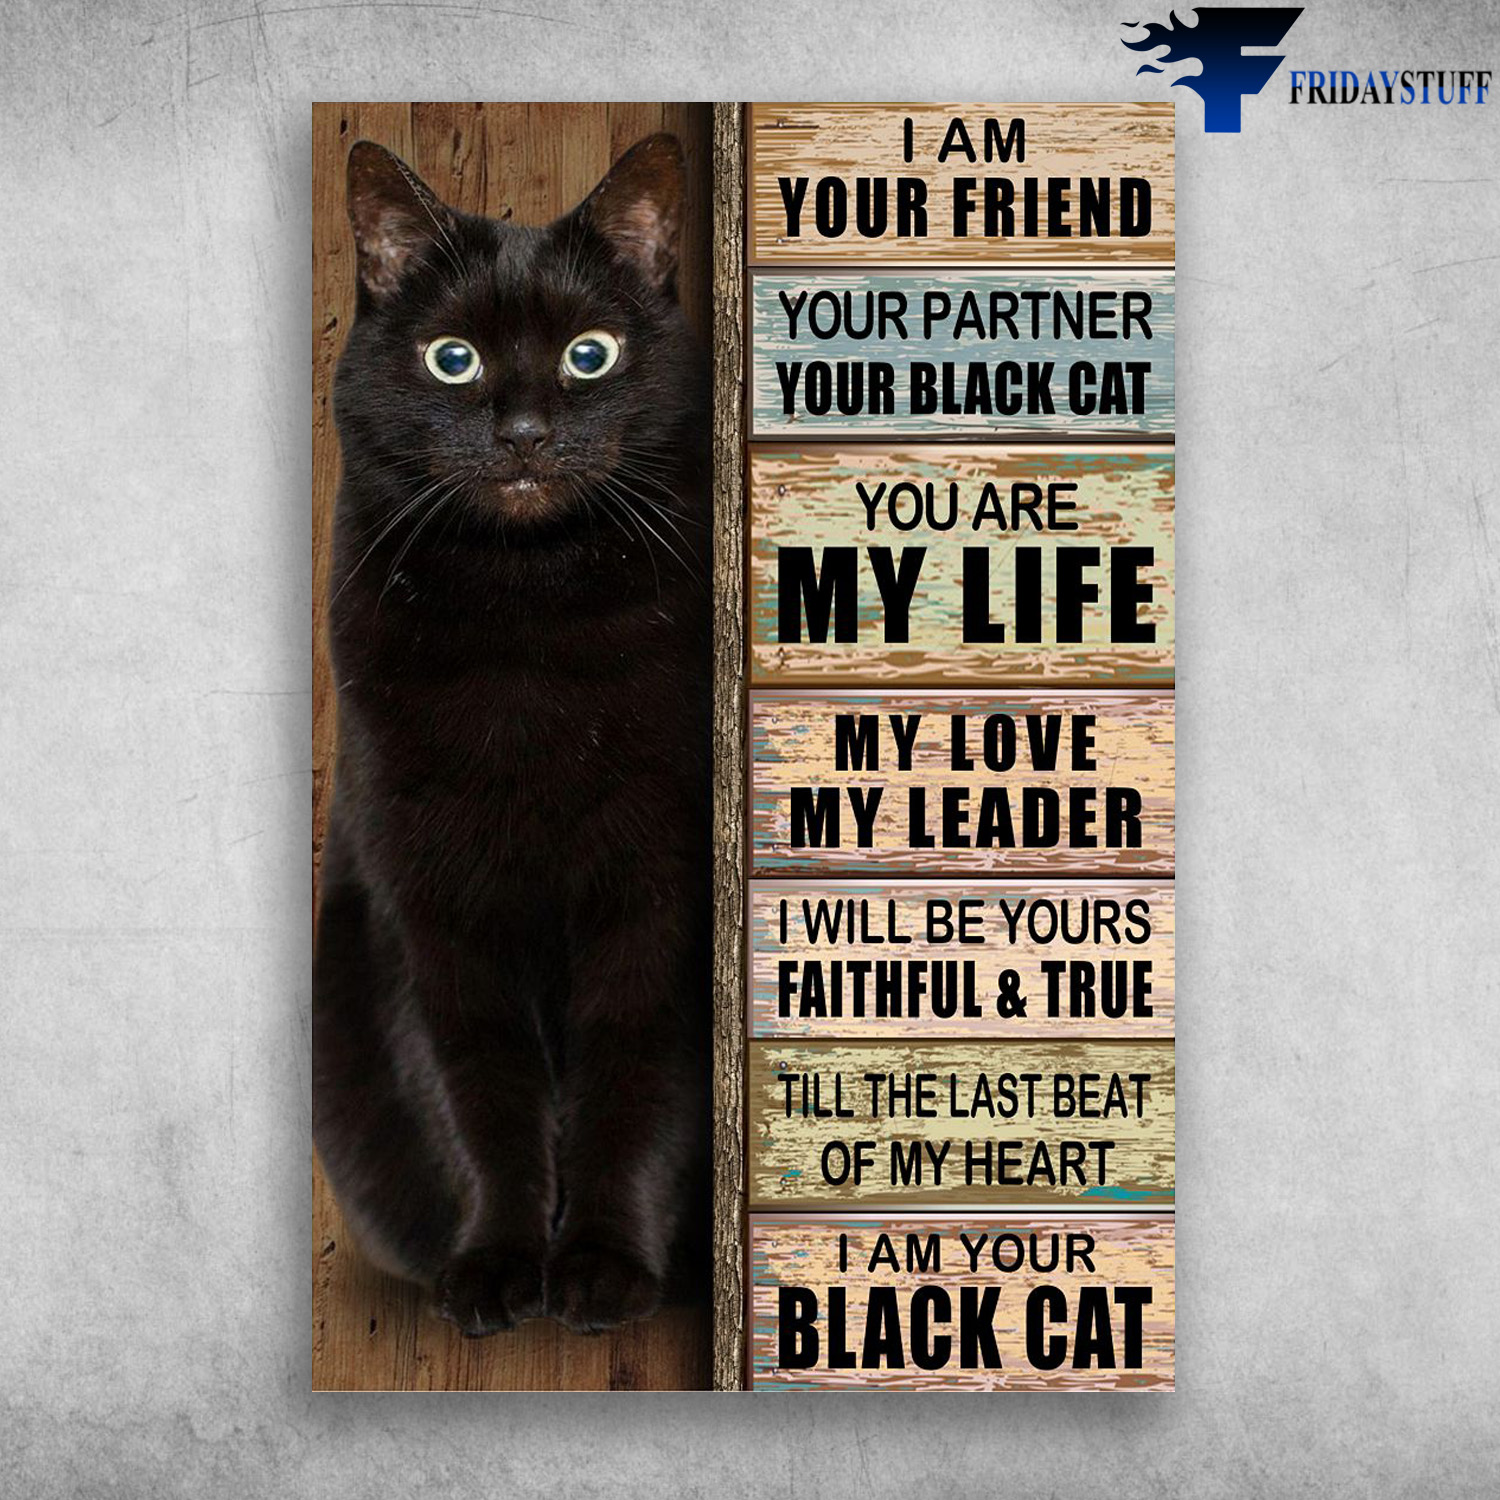 Cute Black Cat Sitting - I Am Your Friend, Your Partner, Your Black Cat, You Are My Life, My Love, My Leader, I Will Be Yours Faithful And True, Till The Last Beat Of My Heart, I Am Your Black Cat